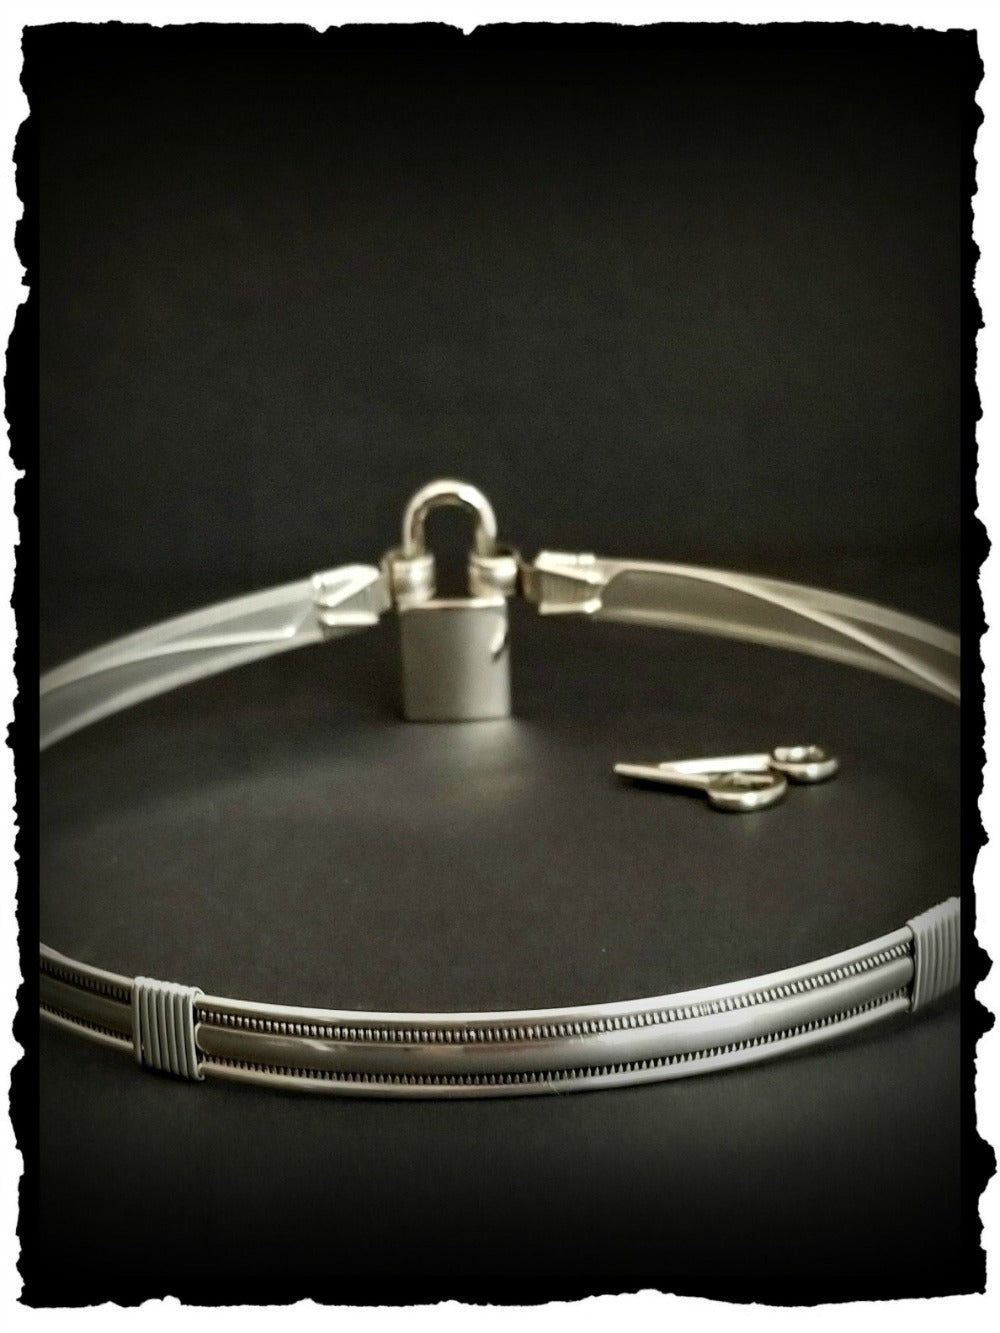 The Janus Submissive Collar is a locking collar made of luscious Sterling Silver, so it's a statement of ownership, yet discreet enough to wear in the vanilla world.